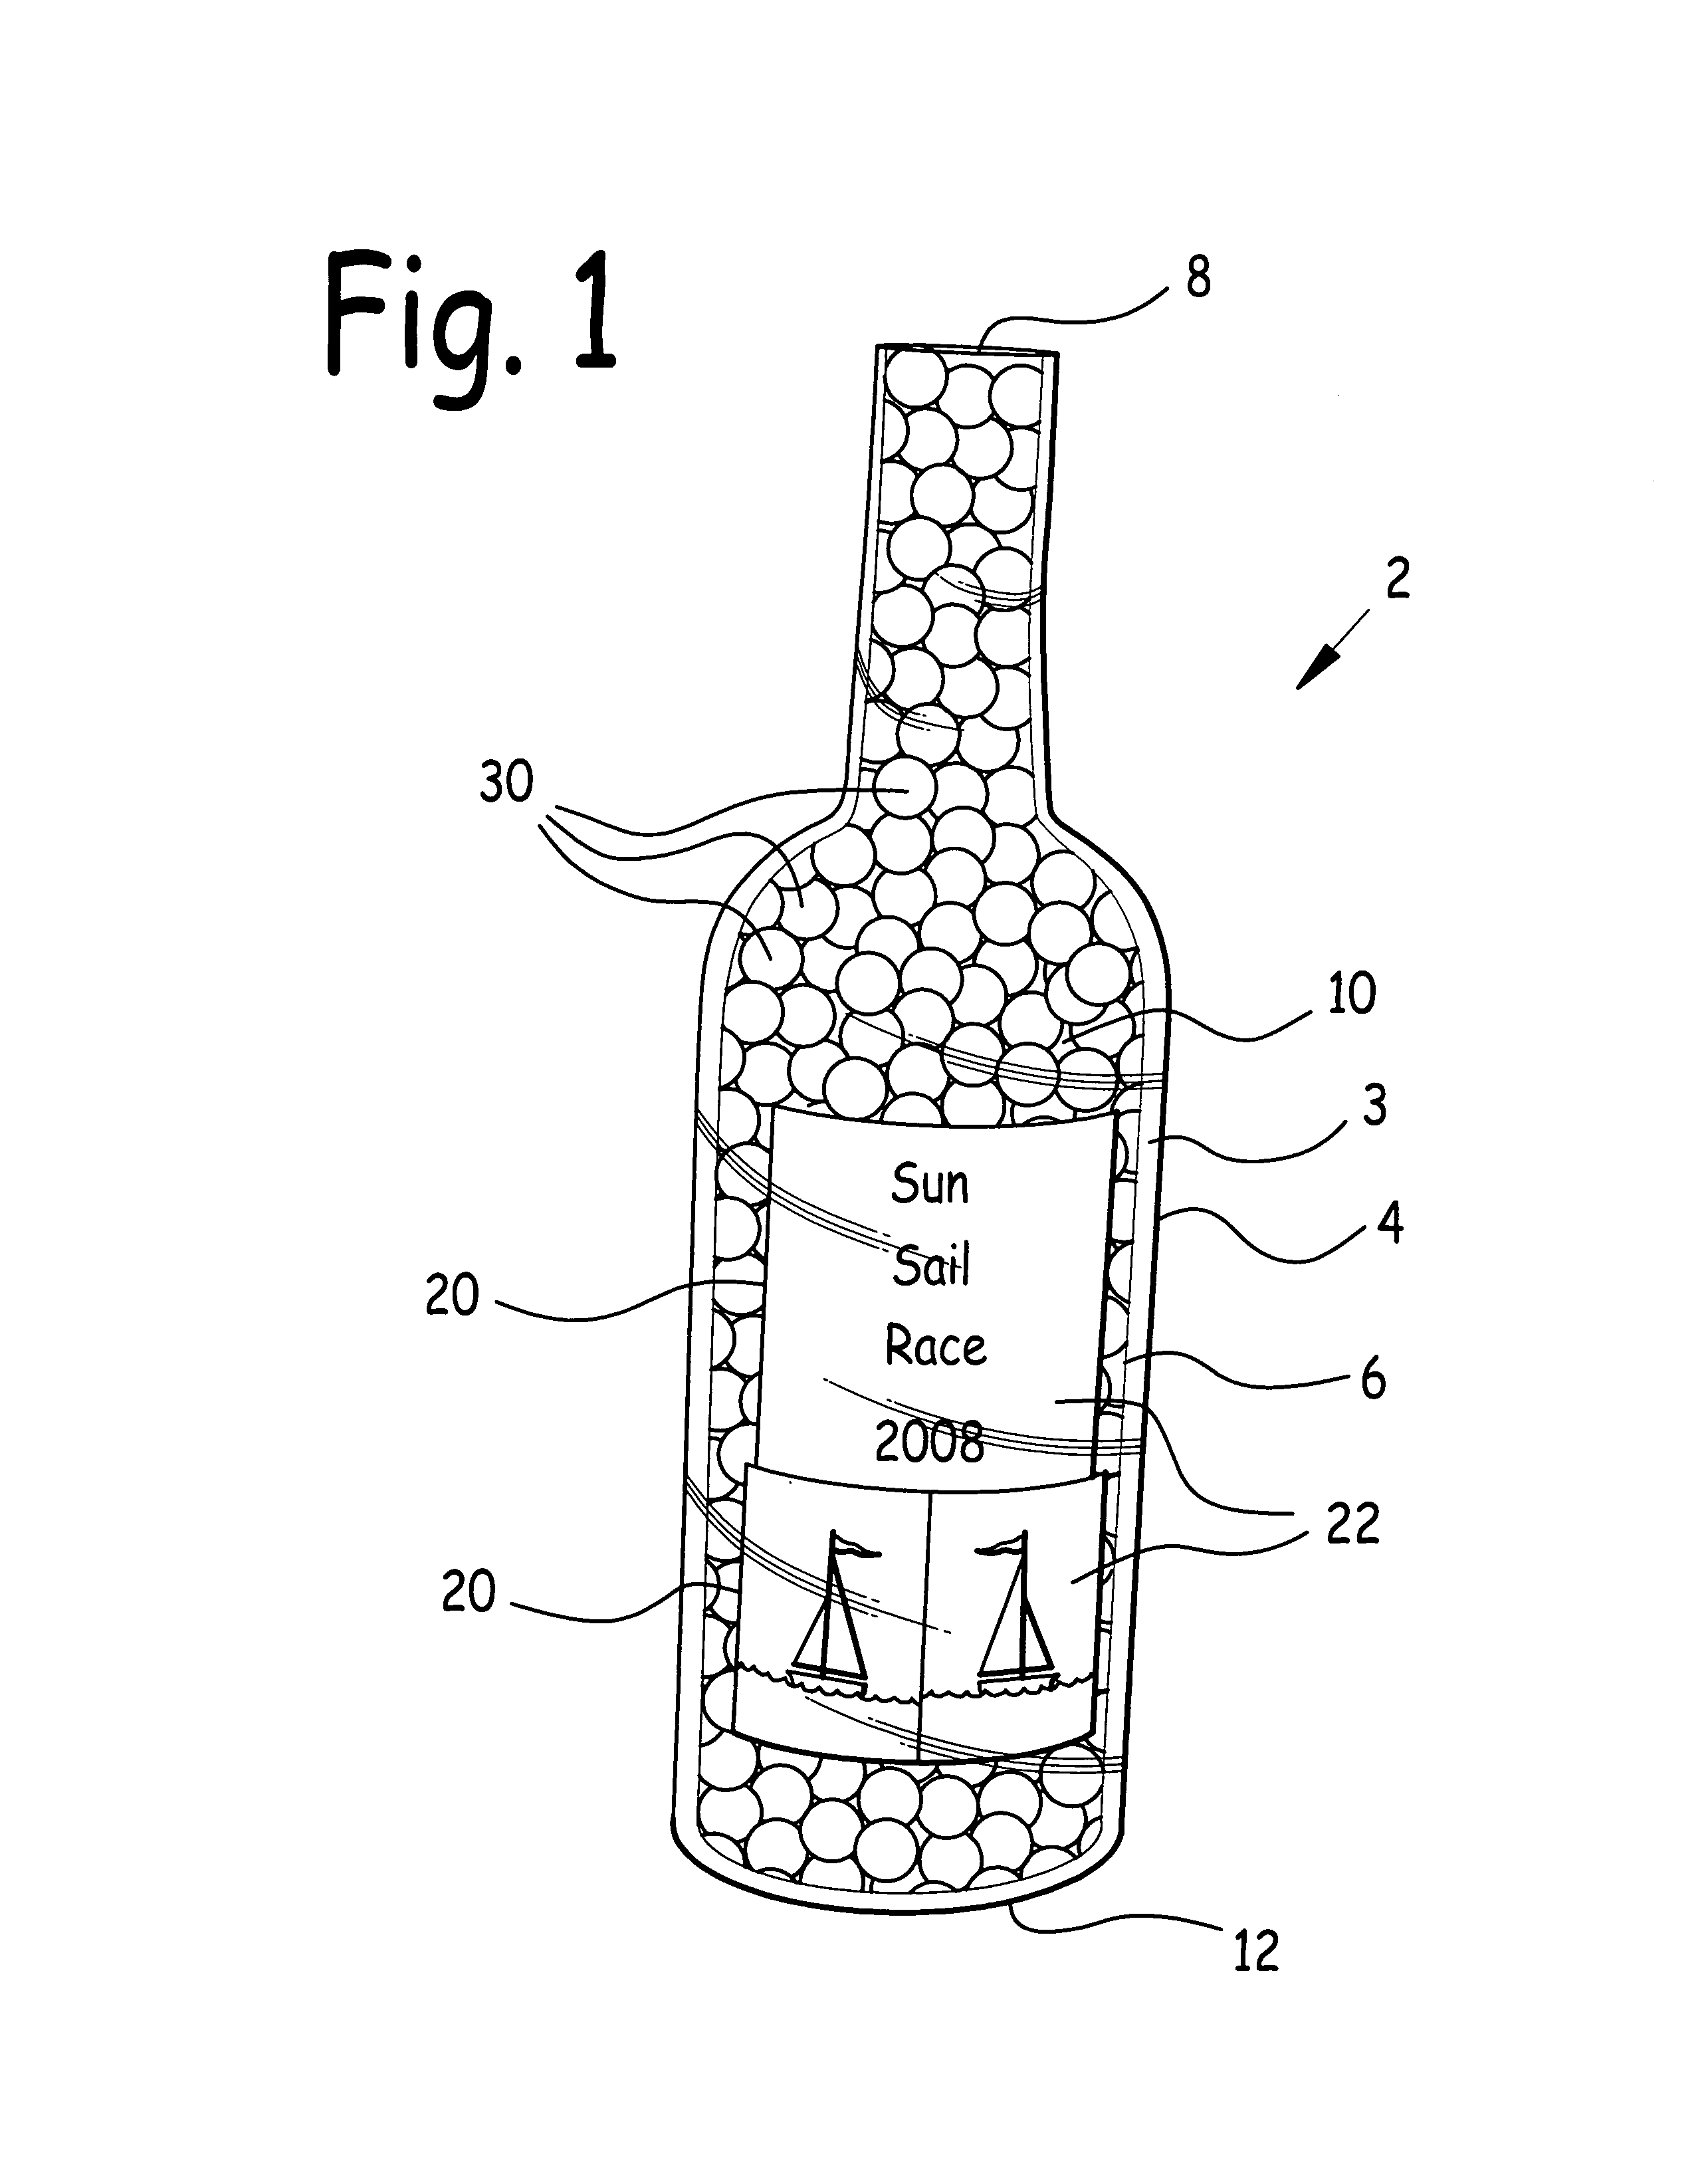 Apparatus and method to display content in a transparent vessel